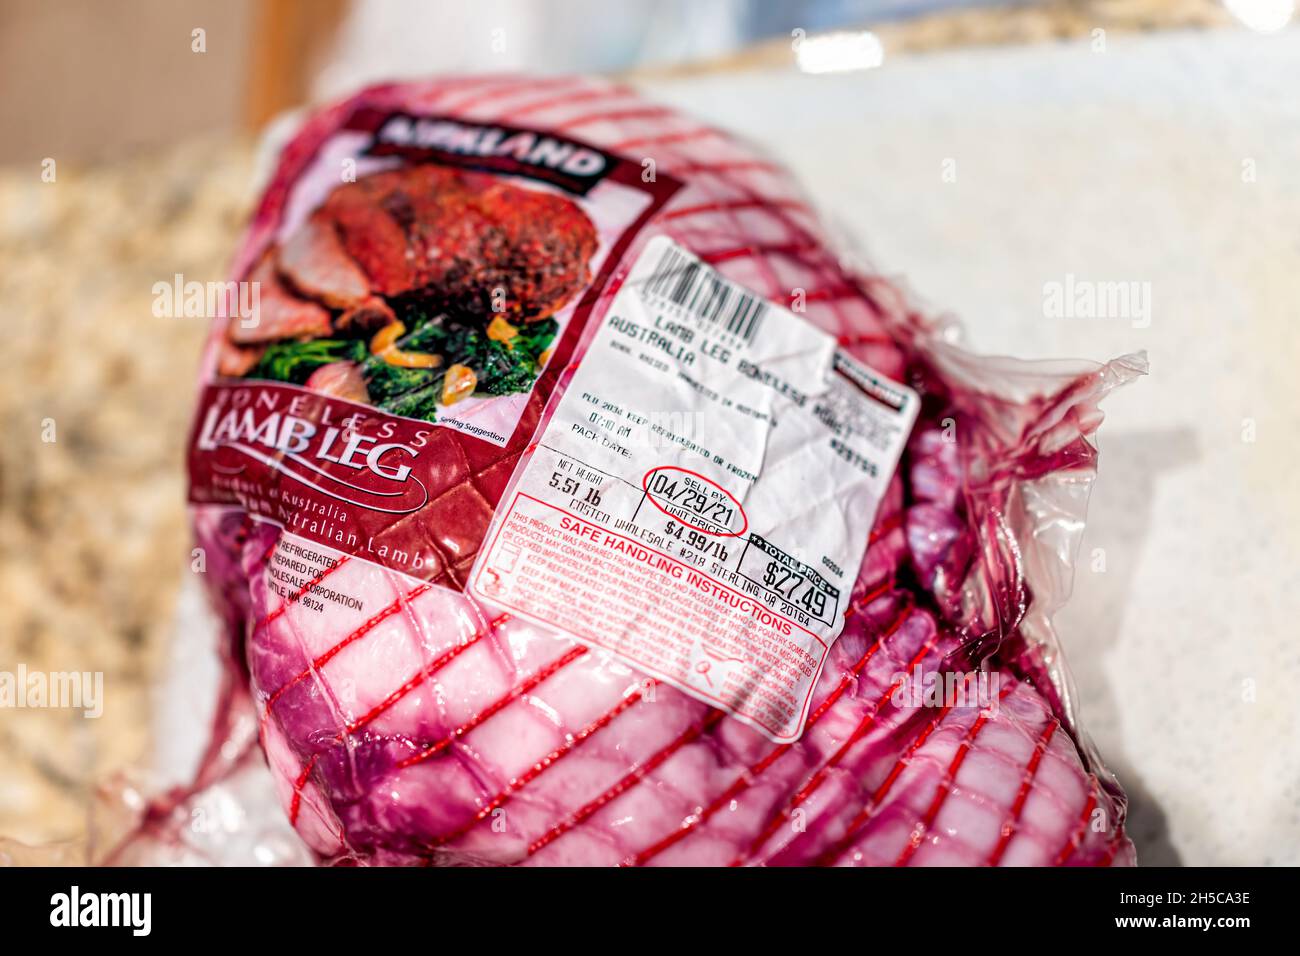 Herndon, USA - March 32, 2021: Red boneless raw lamb meat whole leg by Costco Kirkland Brand from Australia with sign label for price packaged Stock Photo